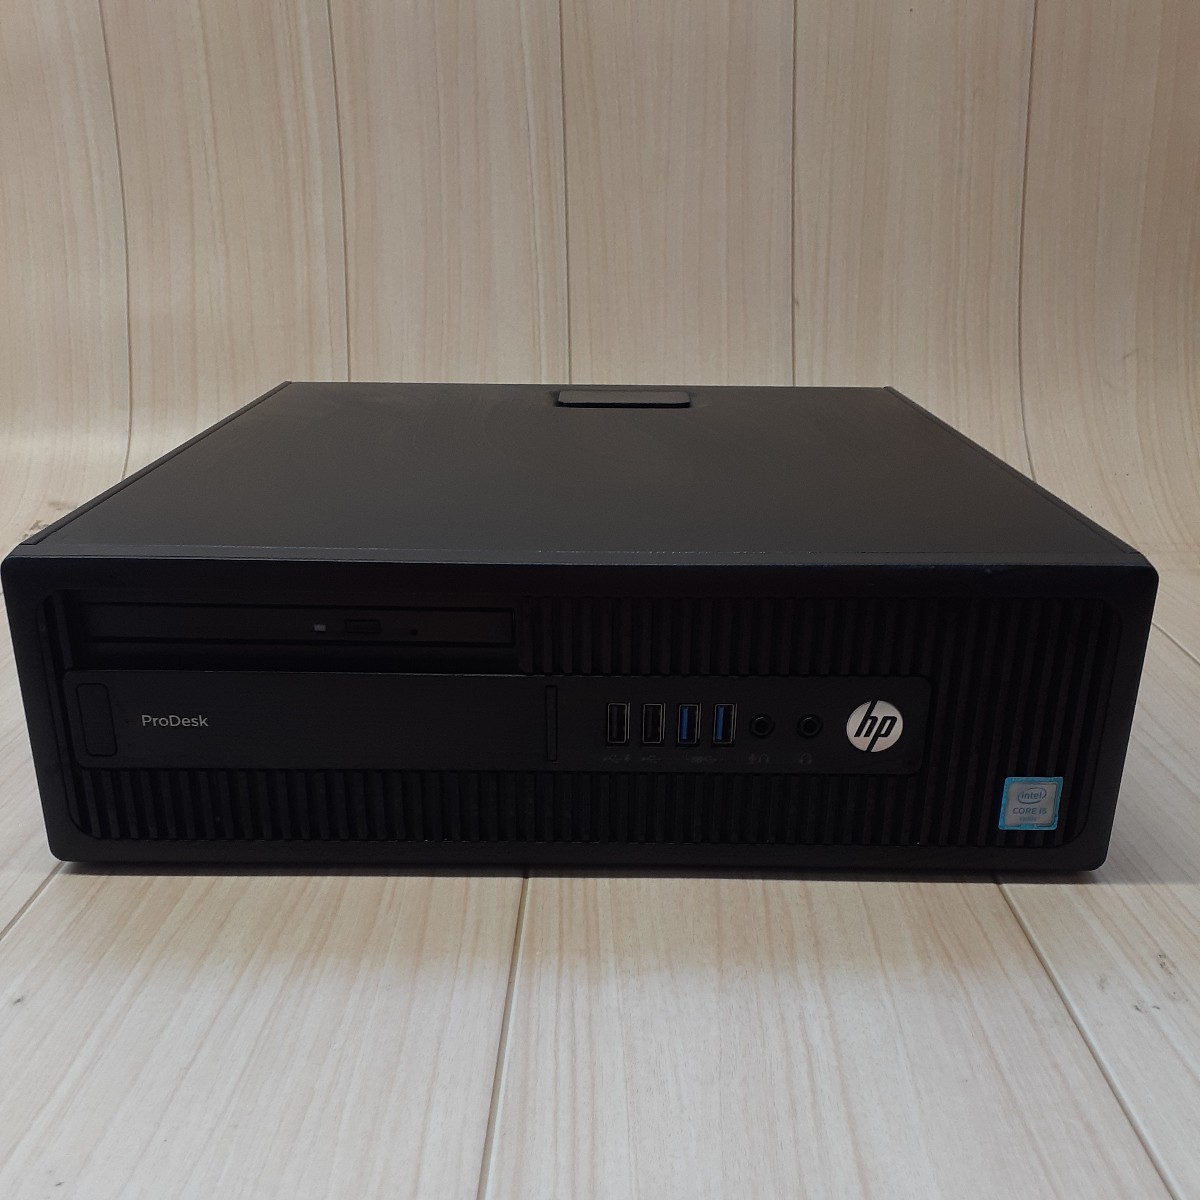 HP ProDesk 600 G2 SFF 第6世代Core i5-6500 3.20GHz/メモリ4GB/HDD